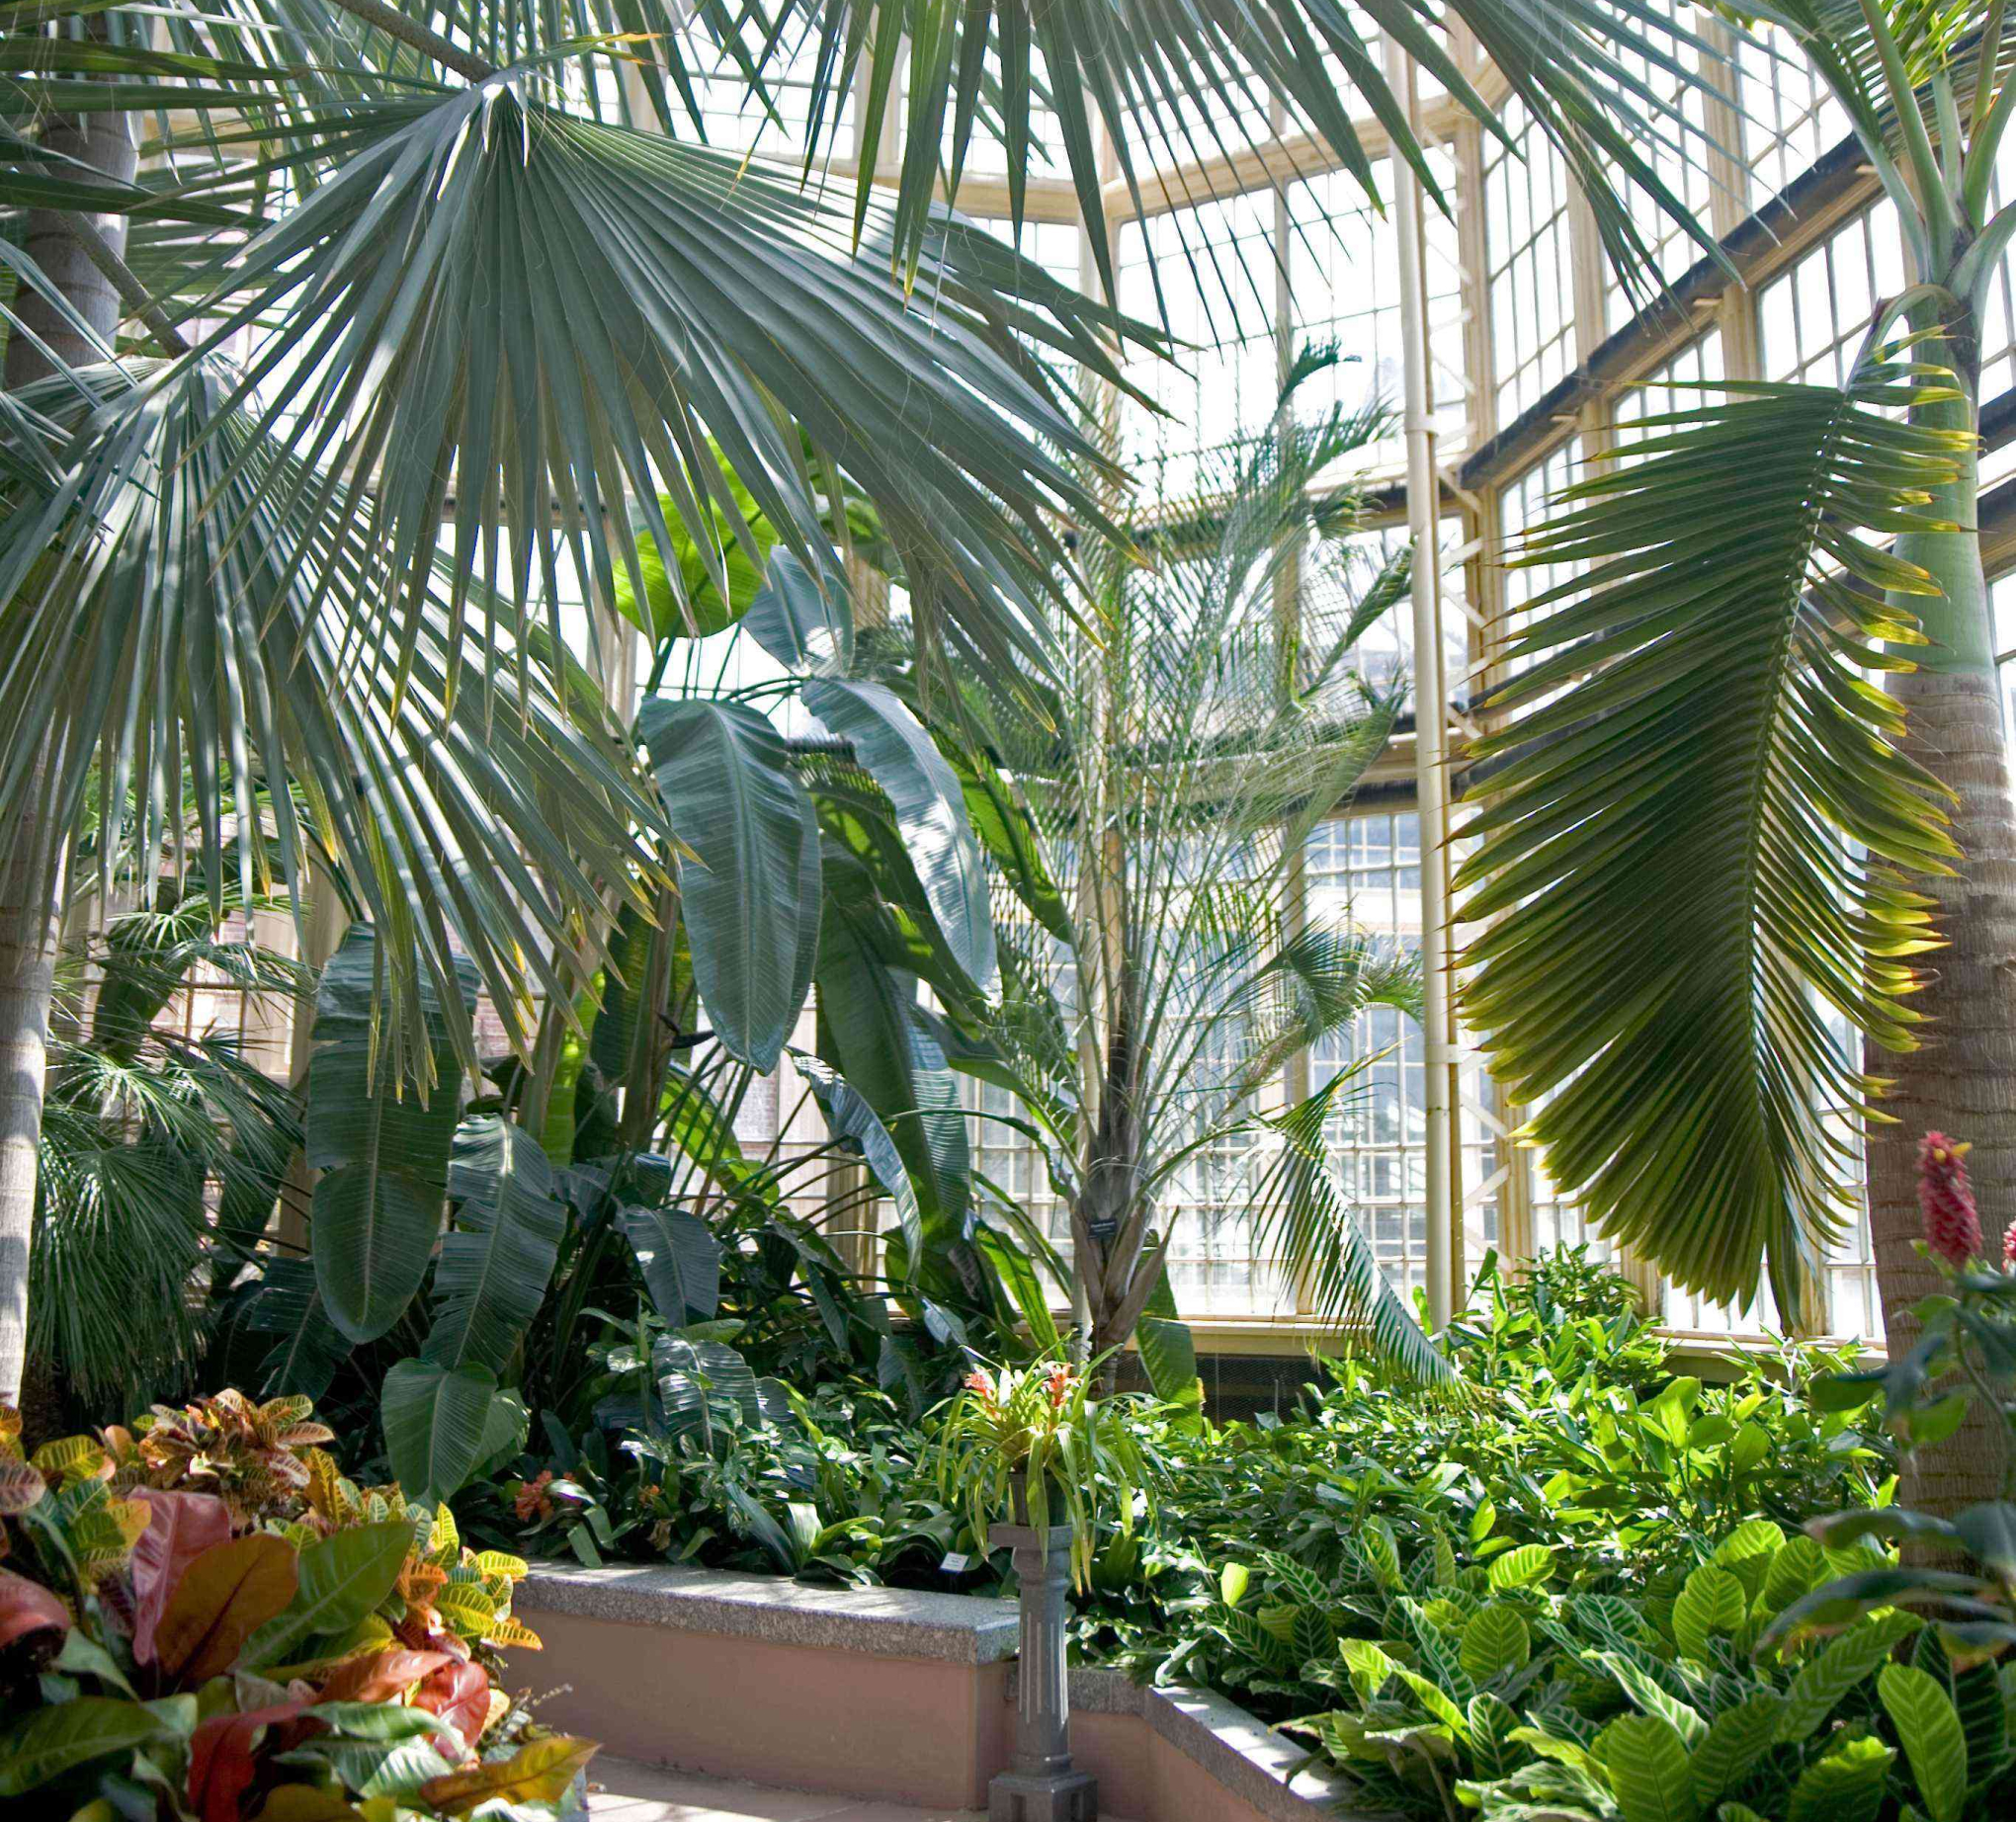 Walkway in the Palm House with a canopy of palm fronds and tropical plants growing below the palm trees